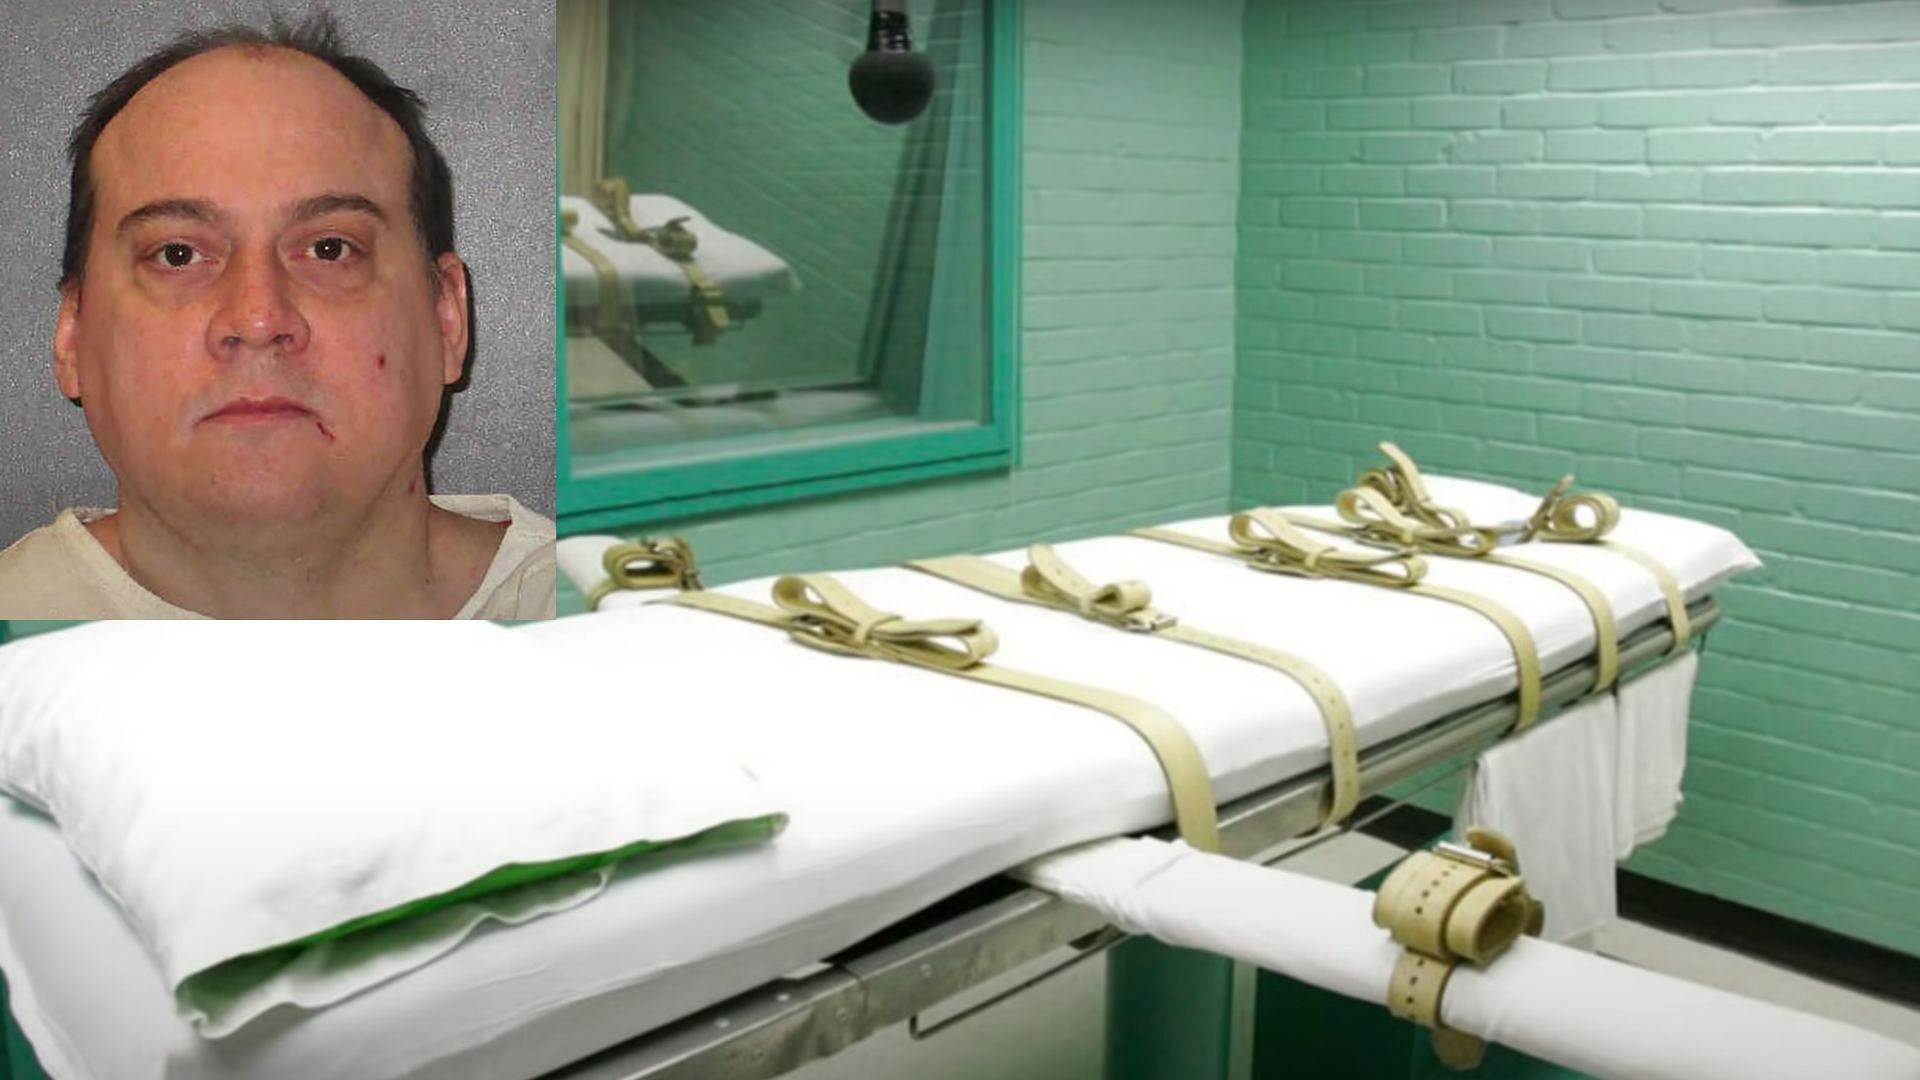 In 2021, John Hummel was executed in Texas, almost a decade after he was found guilty in a triple murder case (Image via DEATH ROW/YouTube)